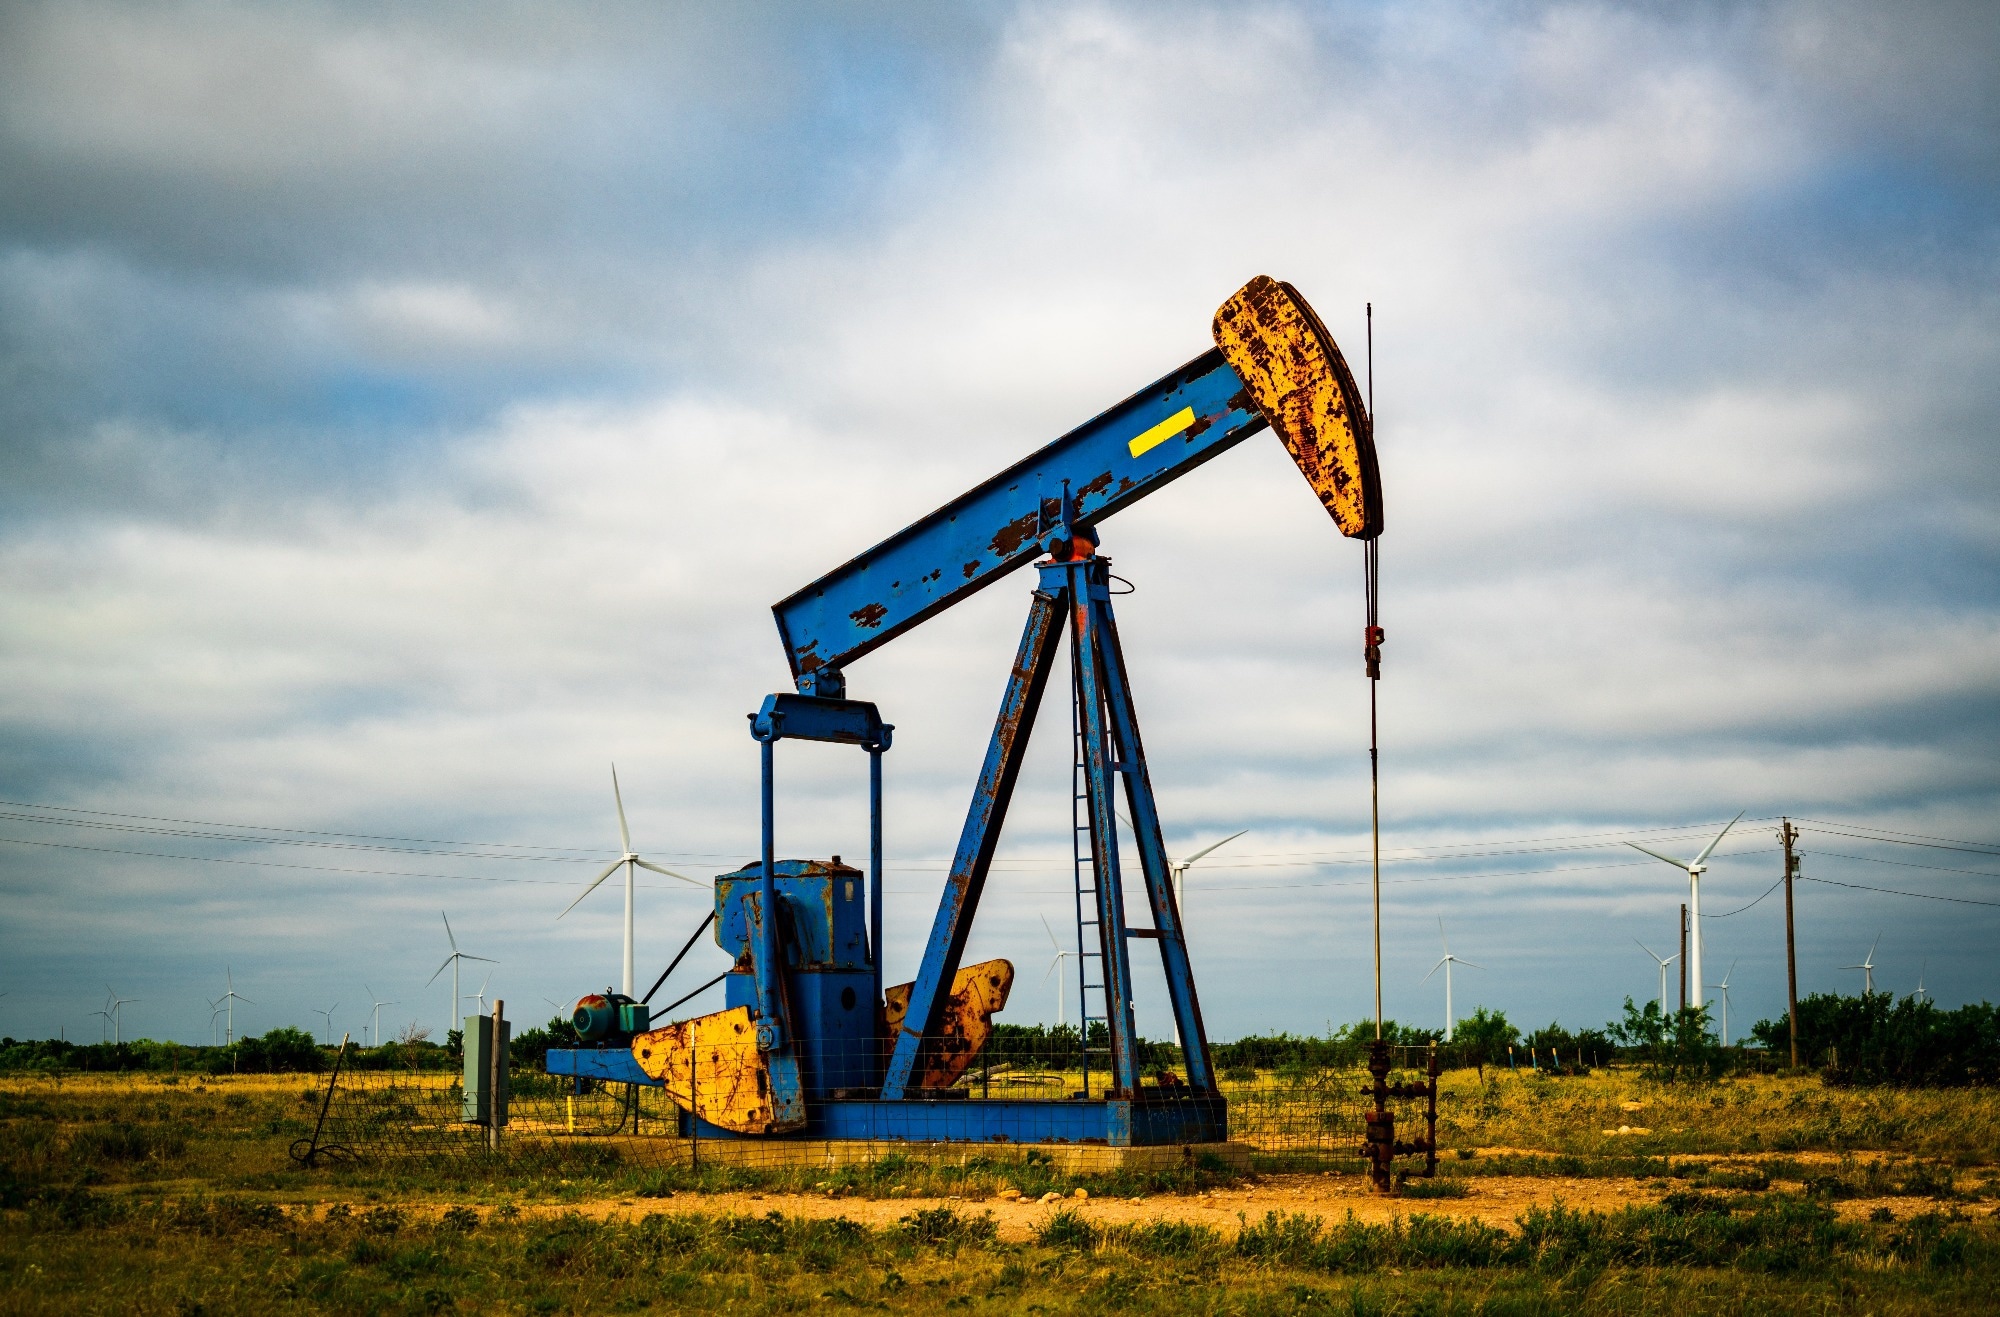 Study: Residential proximity to unconventional oil and gas development and birth defects in Ohio. Image Credit: RoschetzkyPhotography/Shutterstock.com